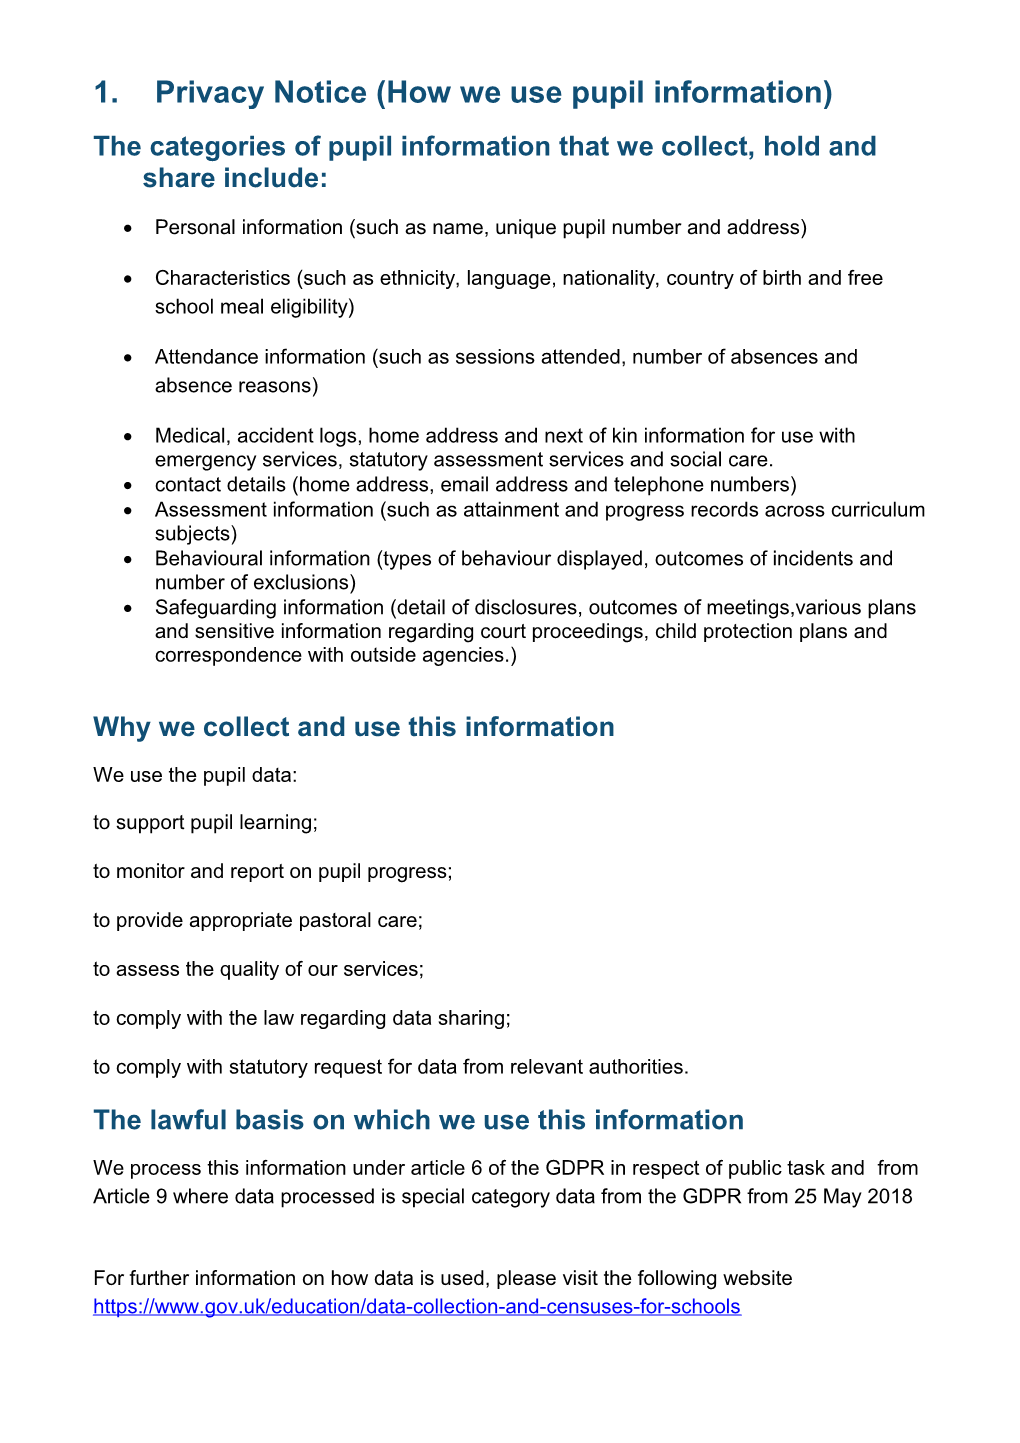 Privacy Notice - How We Use Pupil Information s1